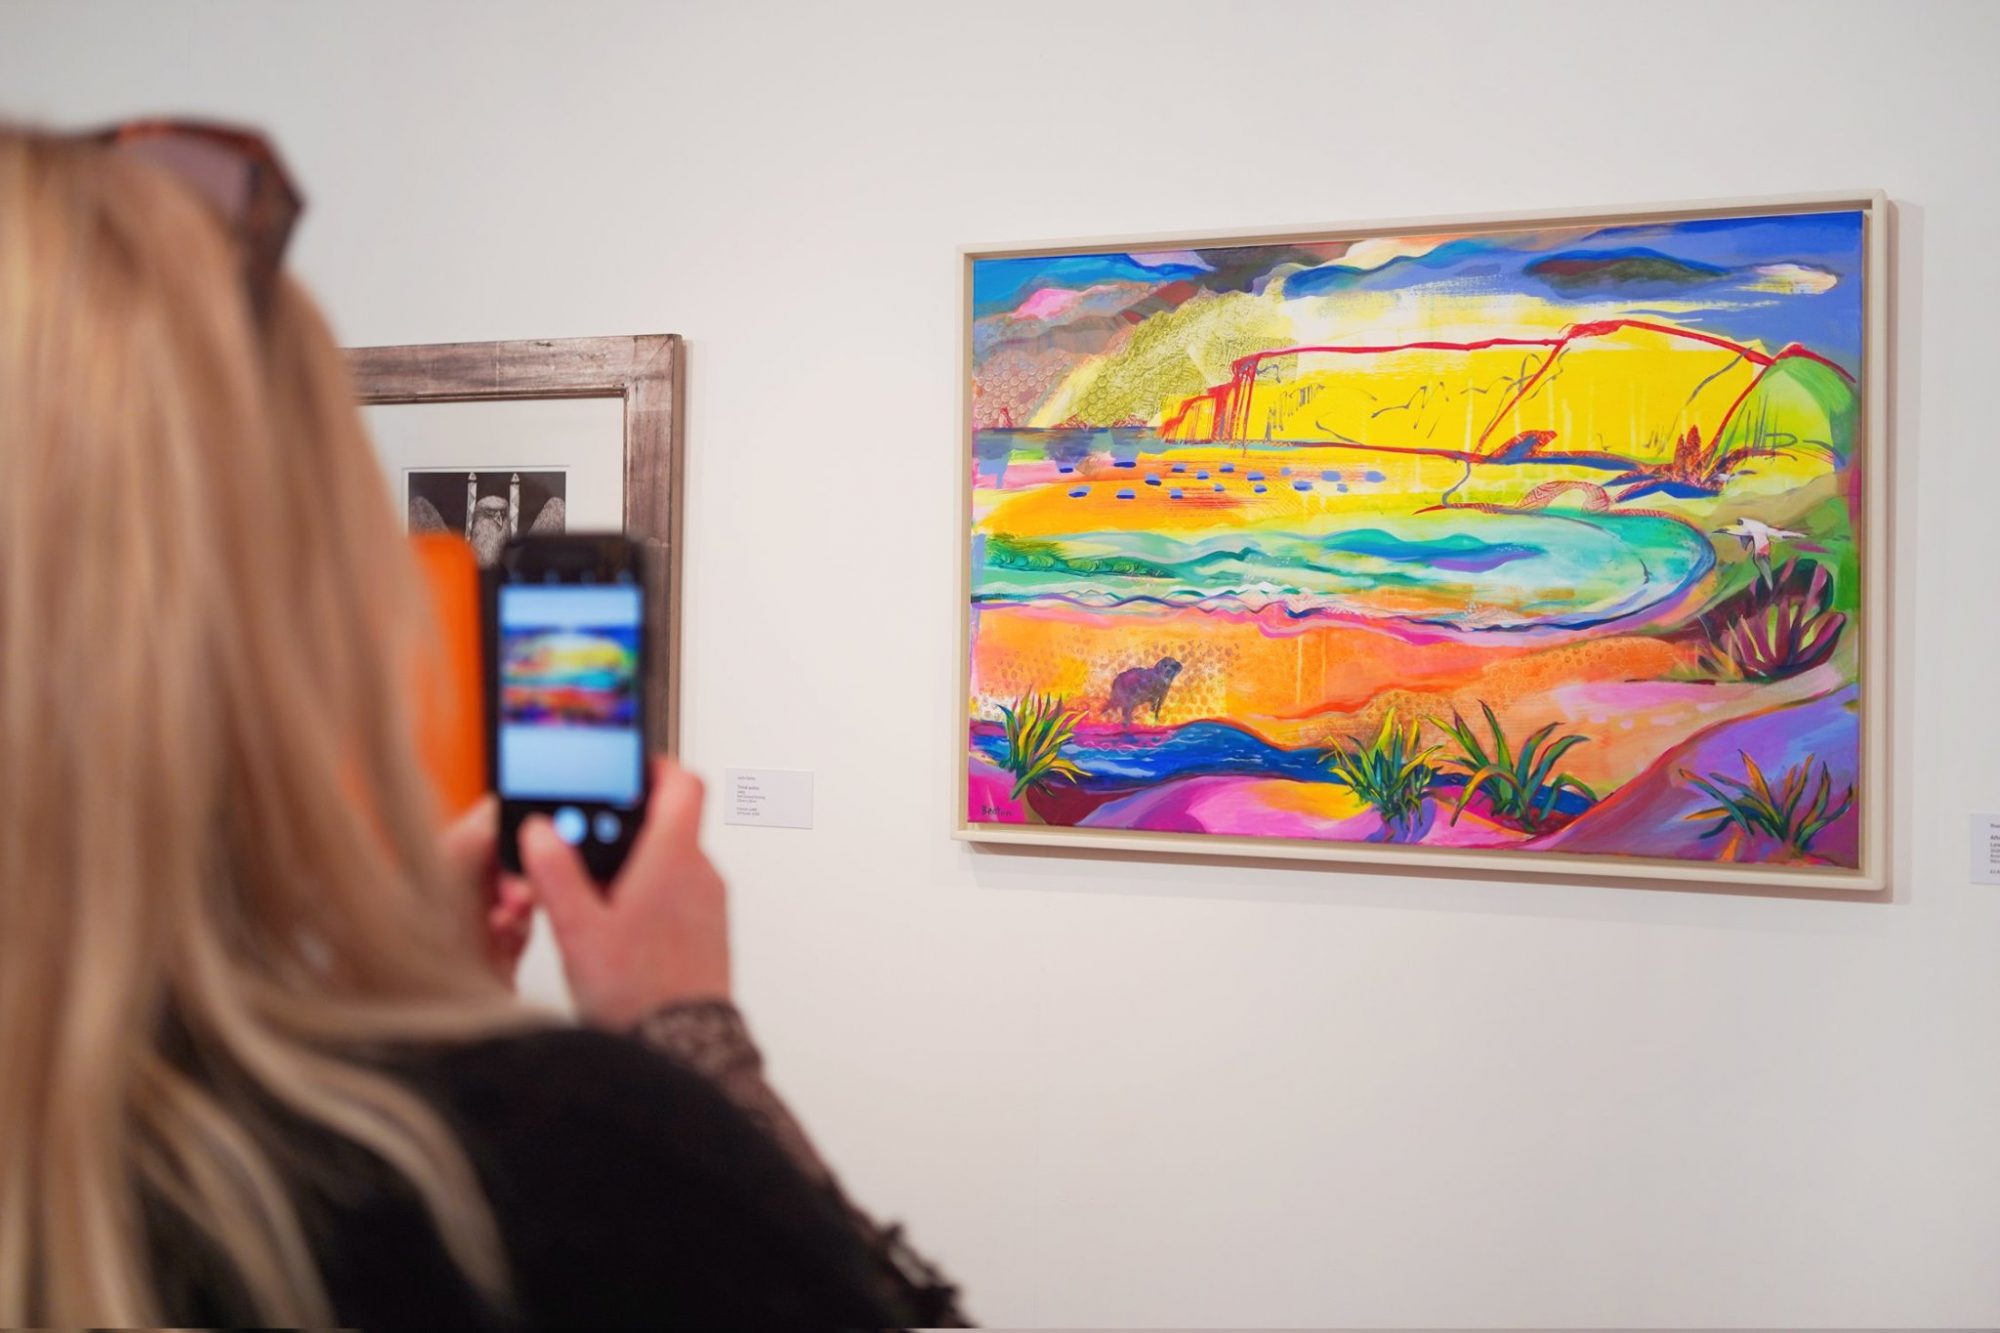 A woman stands in front of two paintings. She is holding her phone out in front of her taking a photograph of a colourful work of art of a landscape.